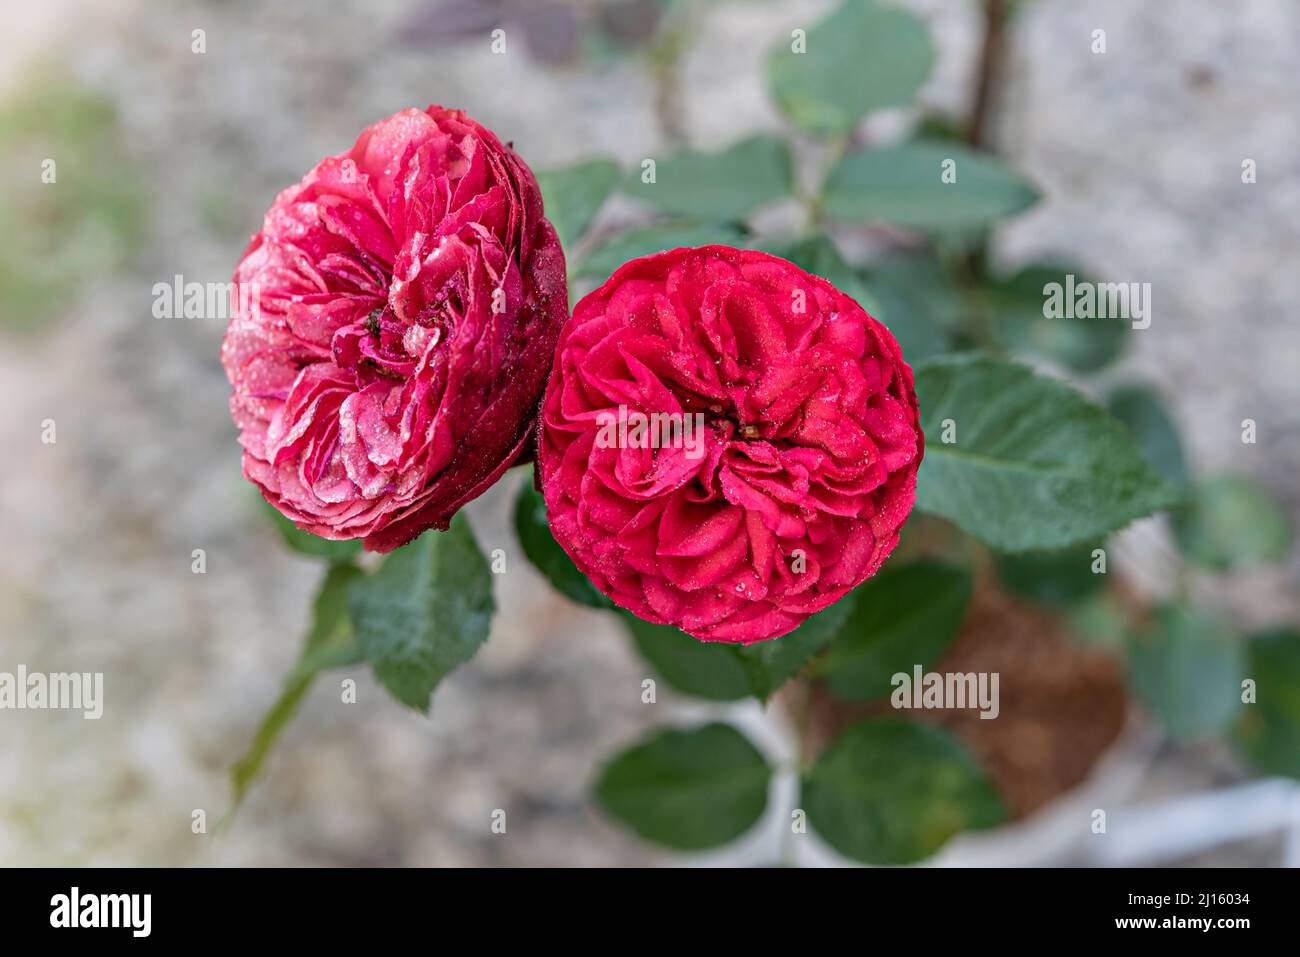 Close up of beautiful fresh red rose flower in green garden Stock Photo